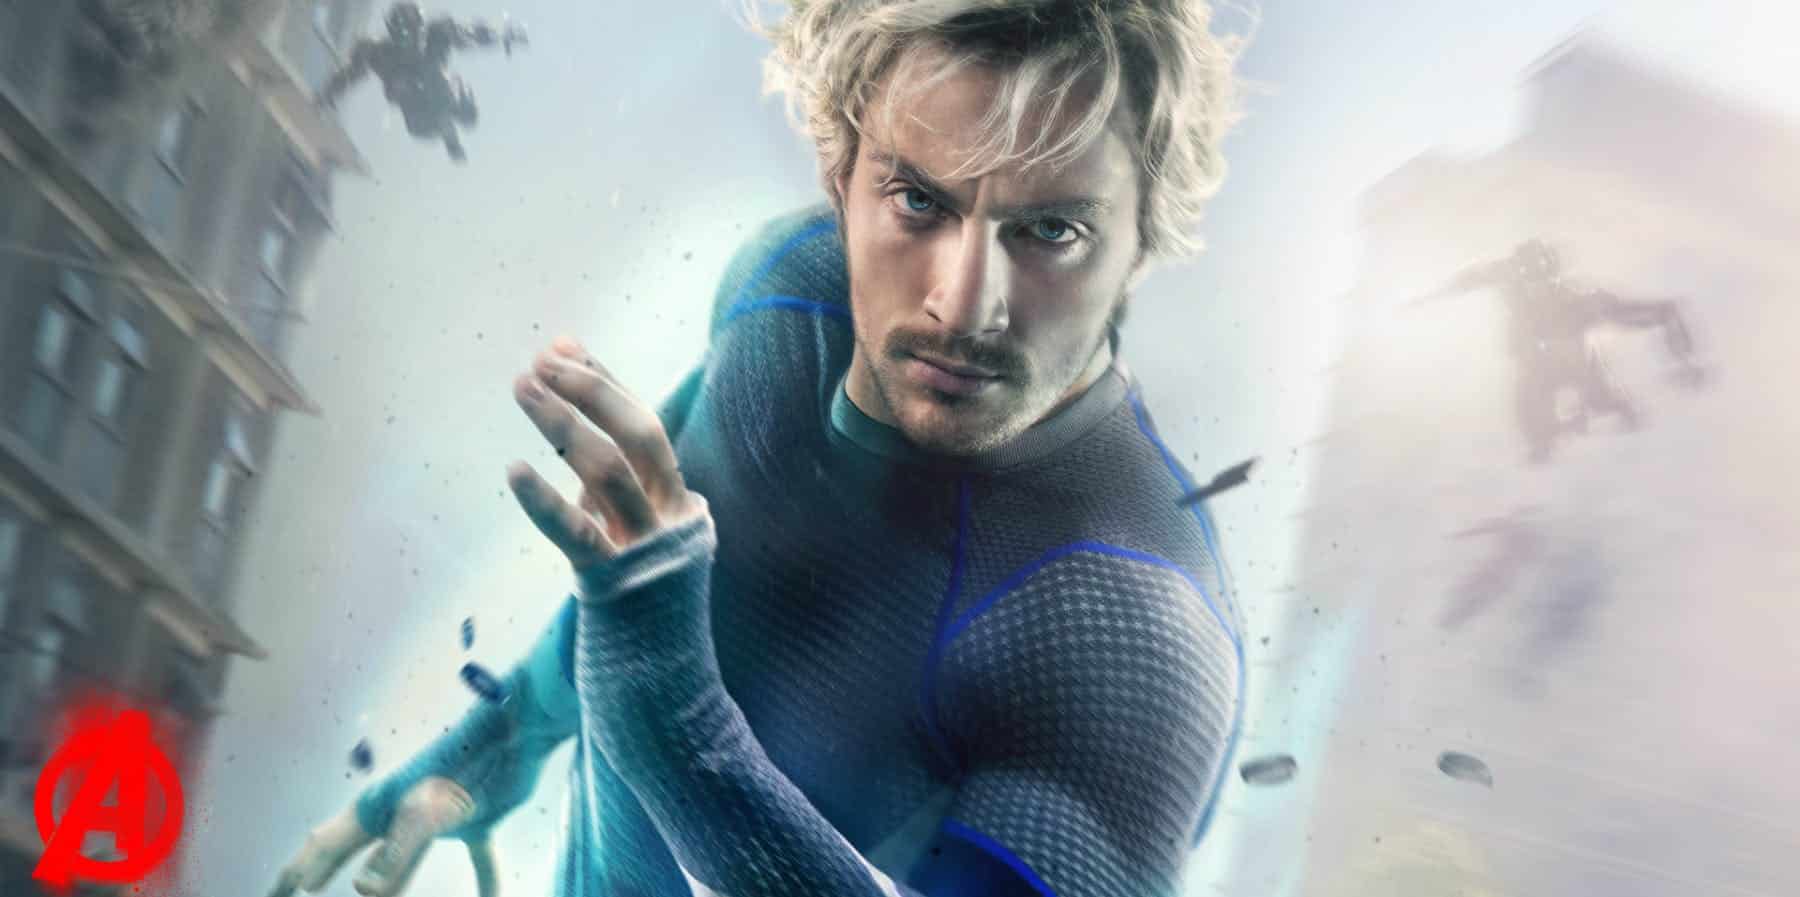 Aaron-Taylor-Johnson-Quicksilver-poster-for-Avengers-Age-of-Ultron